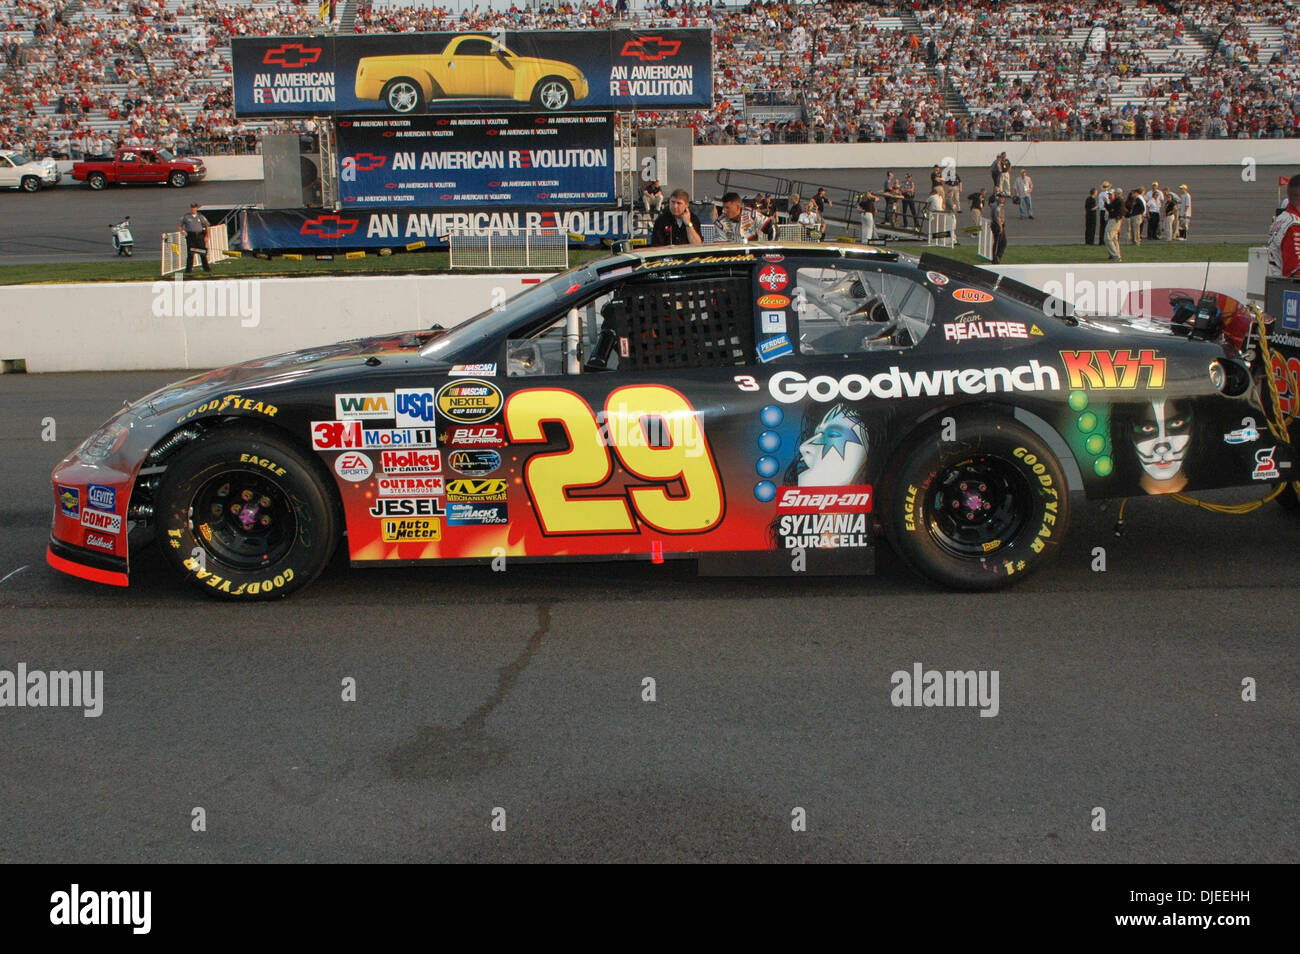 Sep 11, 2004; RIchmond, VA, USA; Nascar #29 Goodwrench sponsored car driven by Kevin Harvick with the special KISS paint scheme for 'Chevy Rock and Roll 400' at the Richmond International Raceway. Stock Photo